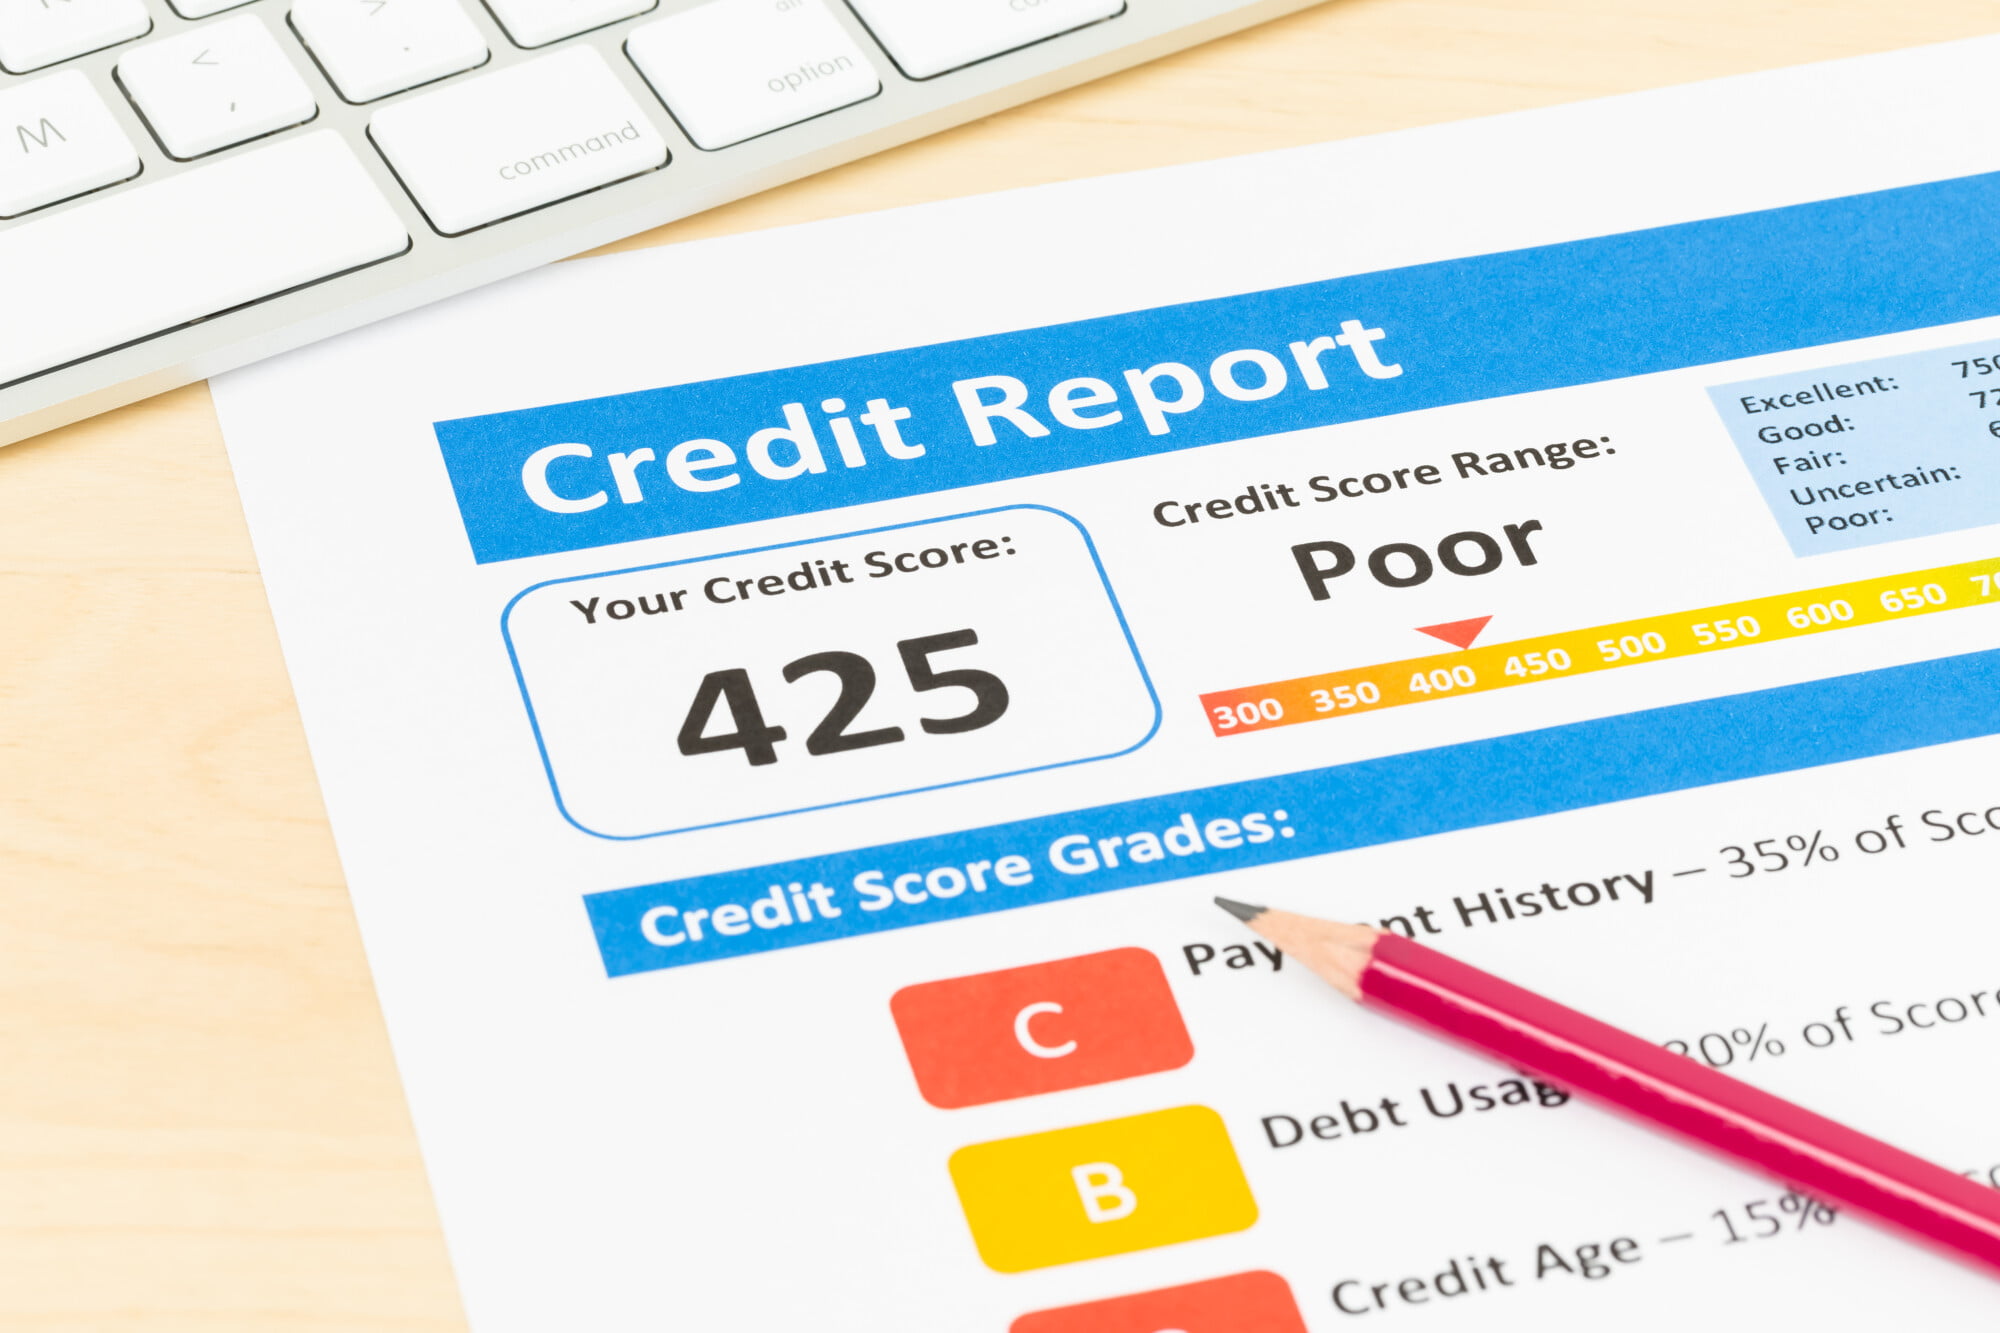 If you're only just learning about what a credit score is, you might not know what a good credit score range is. Learn more about credit scores here.